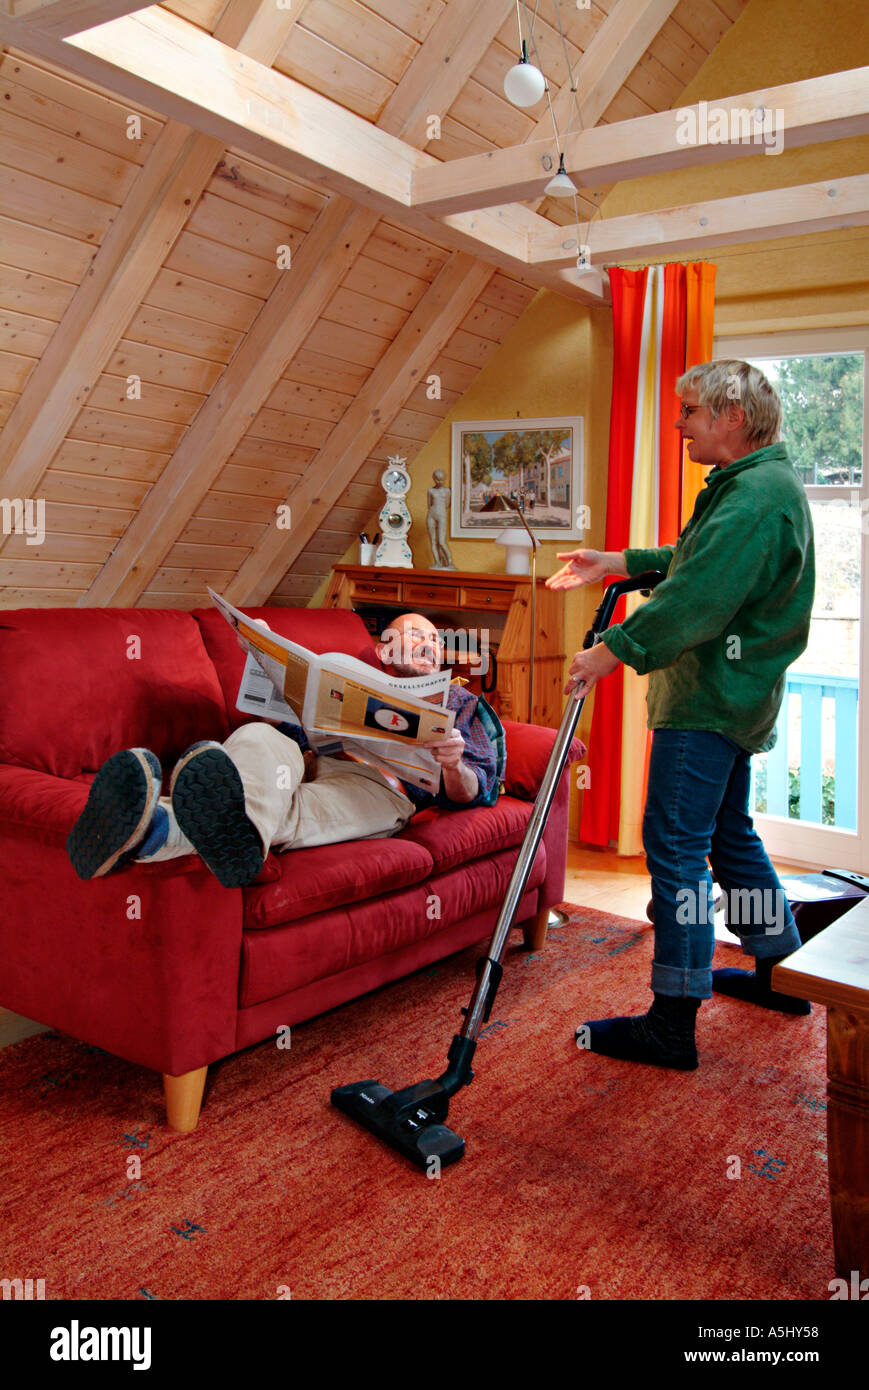 MR PR woman vacuuming hoovering and grousing with a man lying on a sofa reading a newspaper Stock Photo